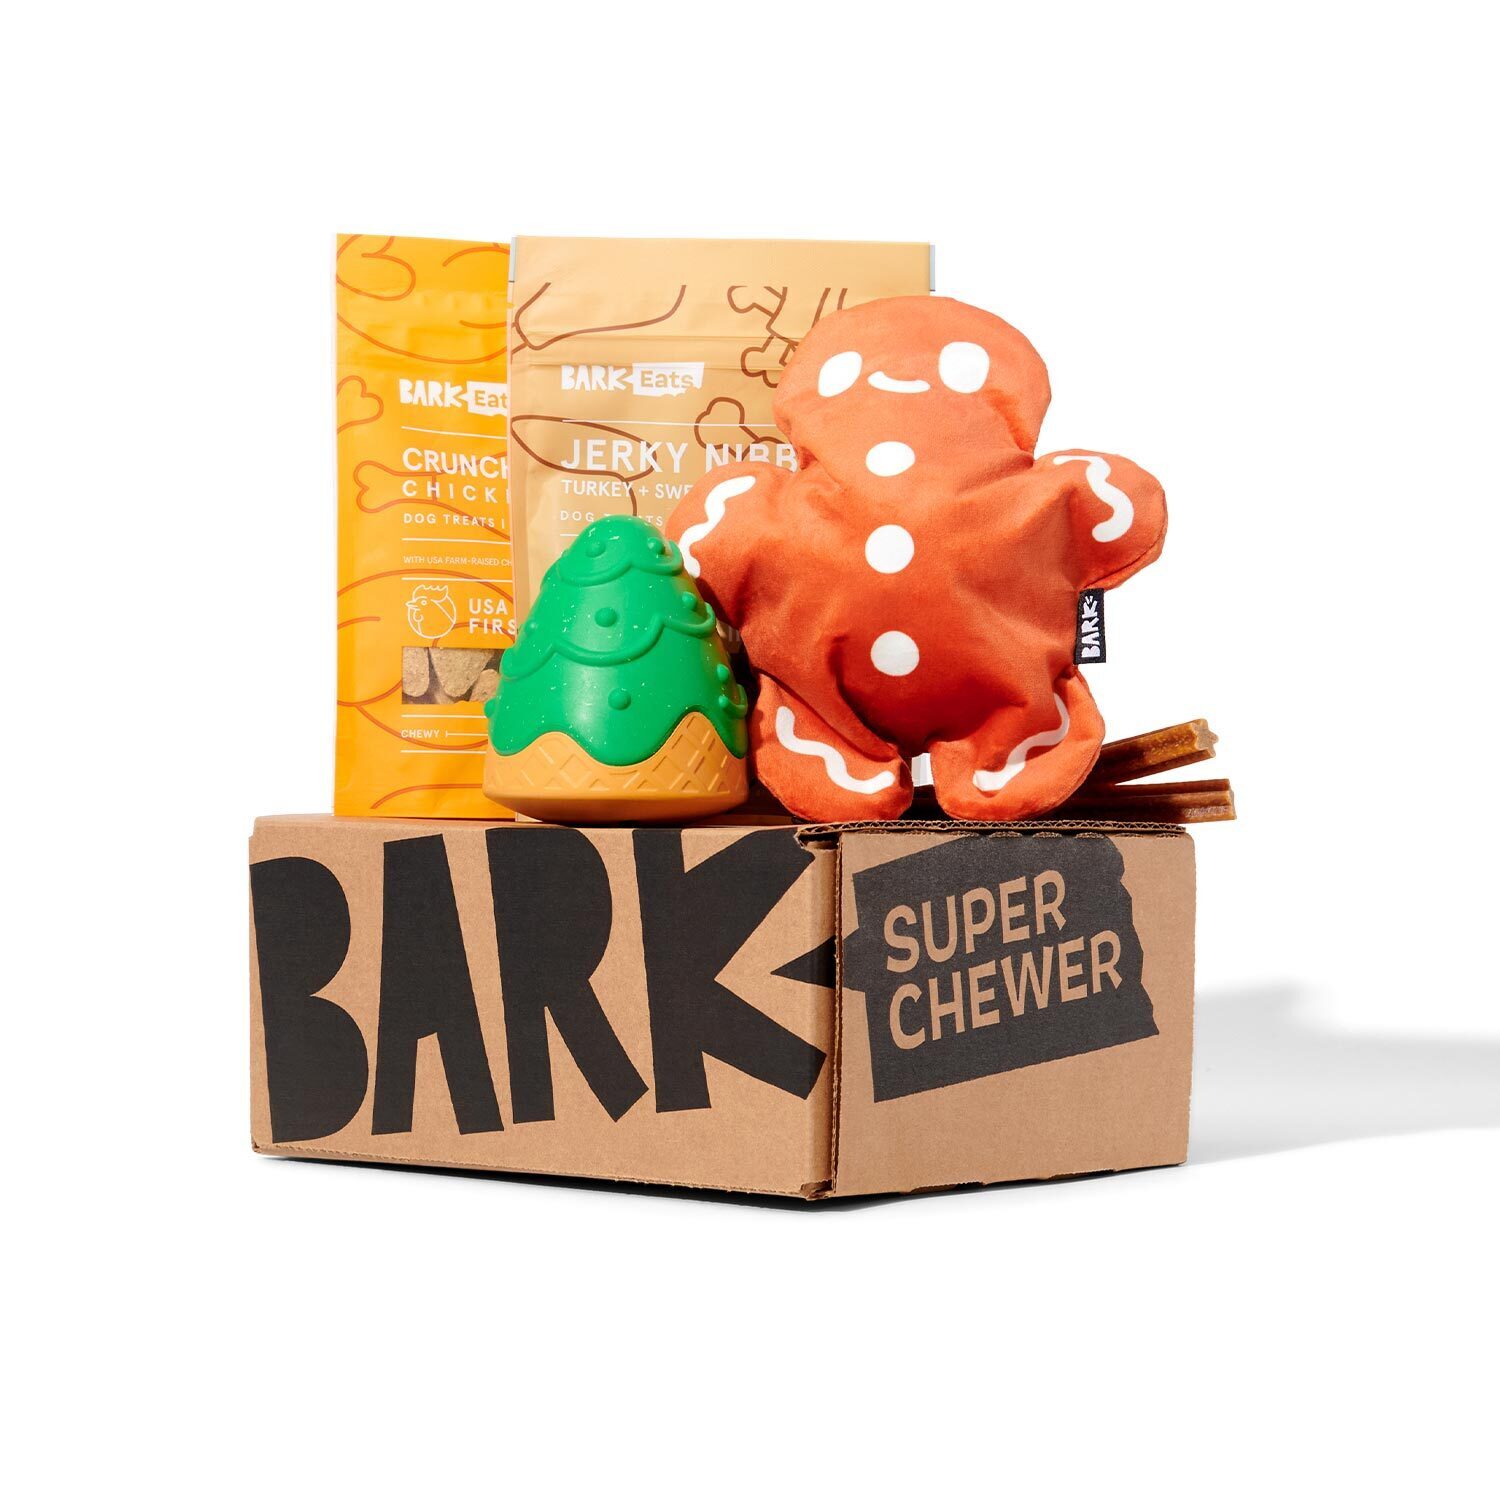 Super Chewer box full of holiday-themed toys, treats, and chews